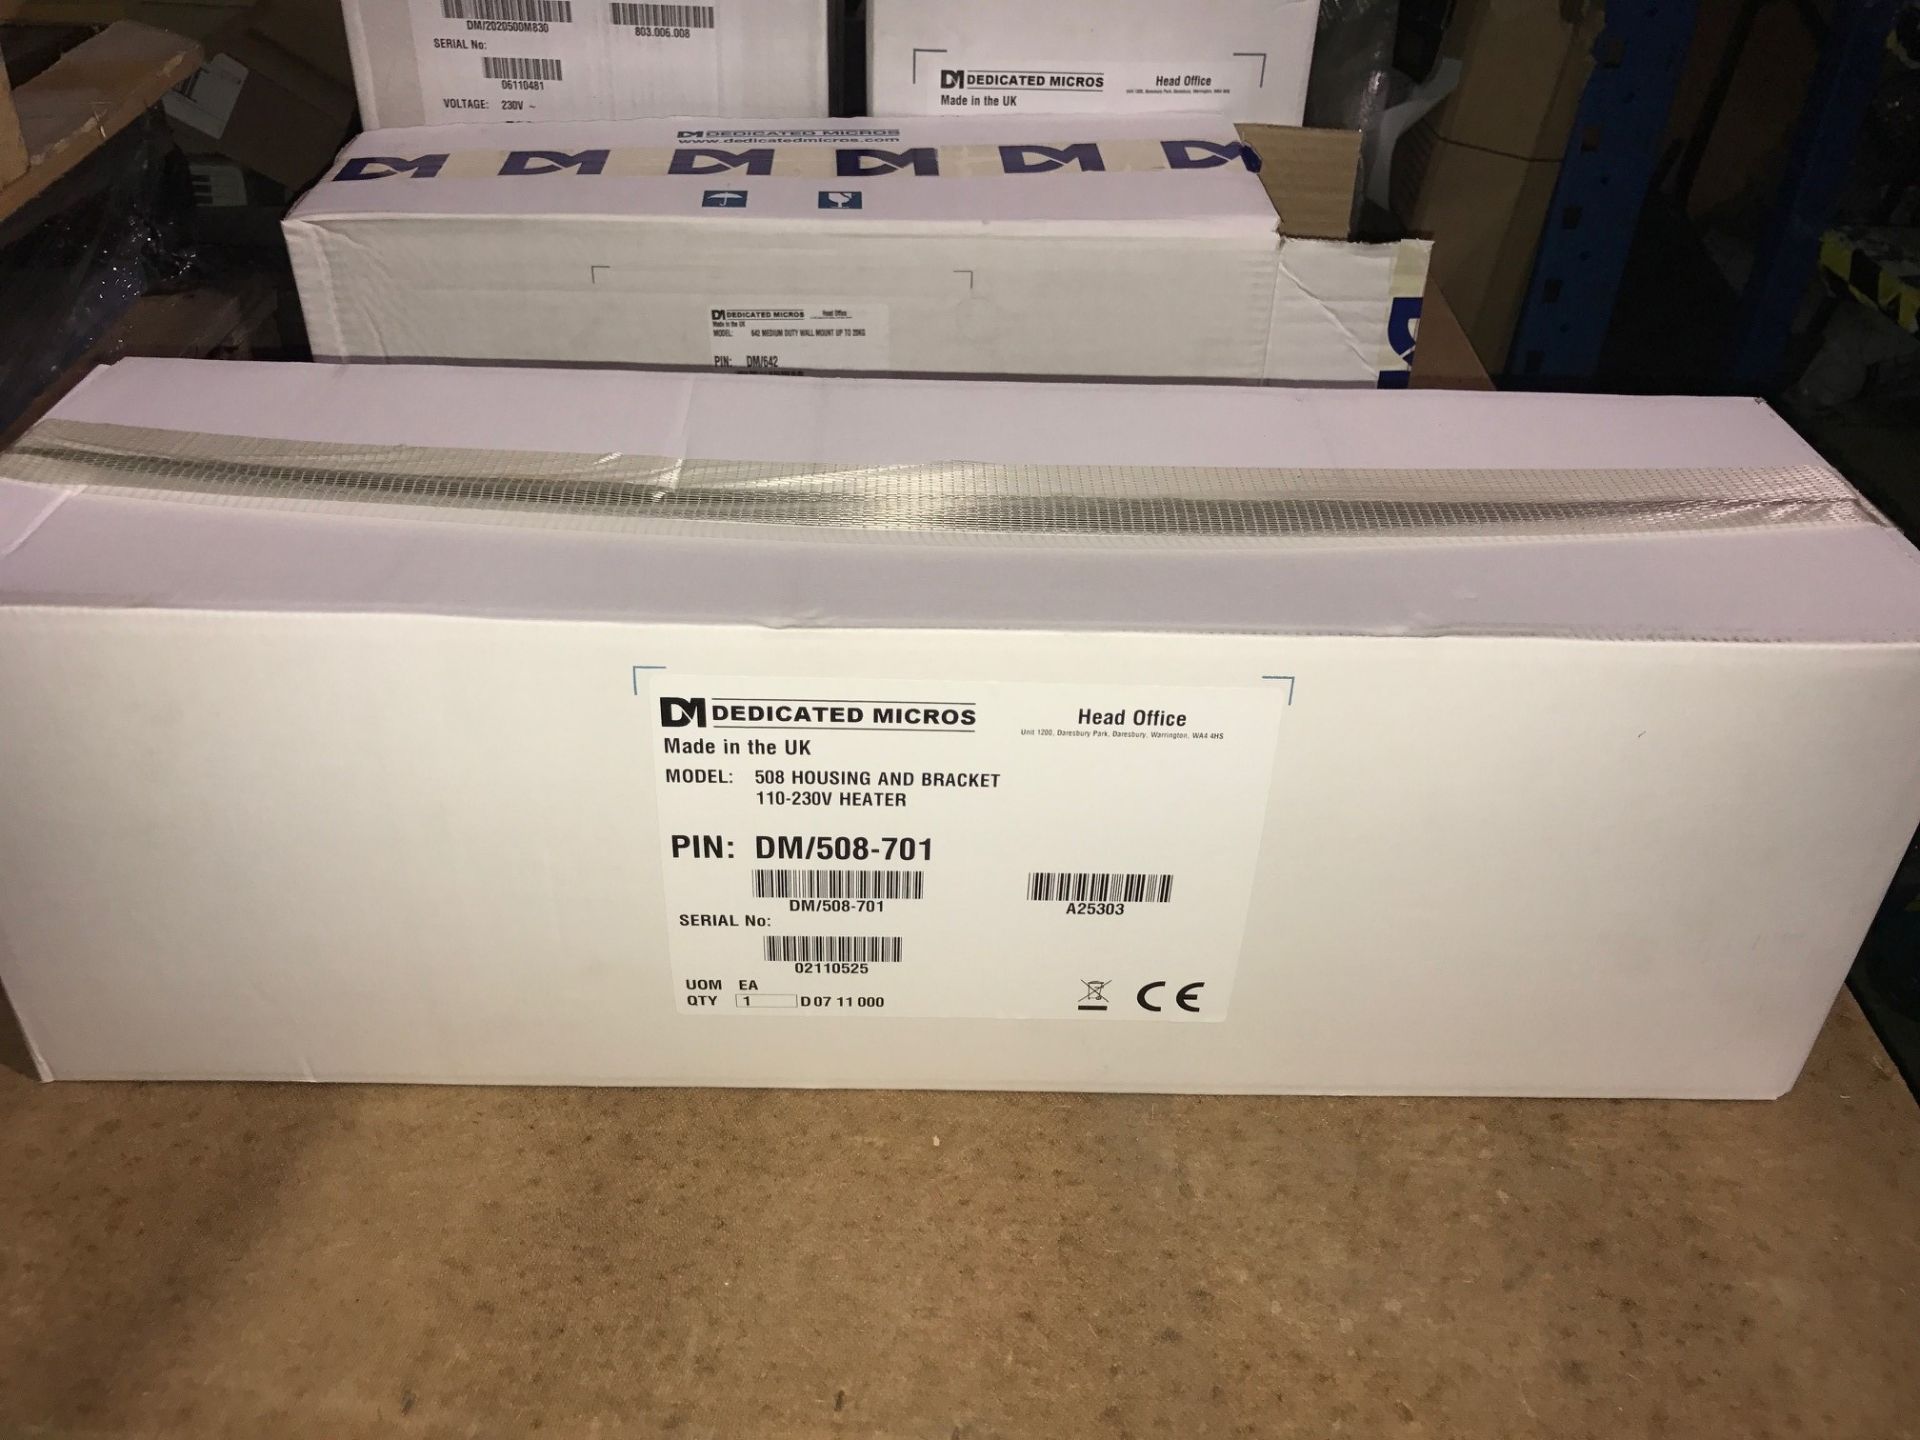 1 x Dedicated Micros DM/508-701 Housing and Bracket 110-230V Heater (Brand New & Boxed) - Image 5 of 5